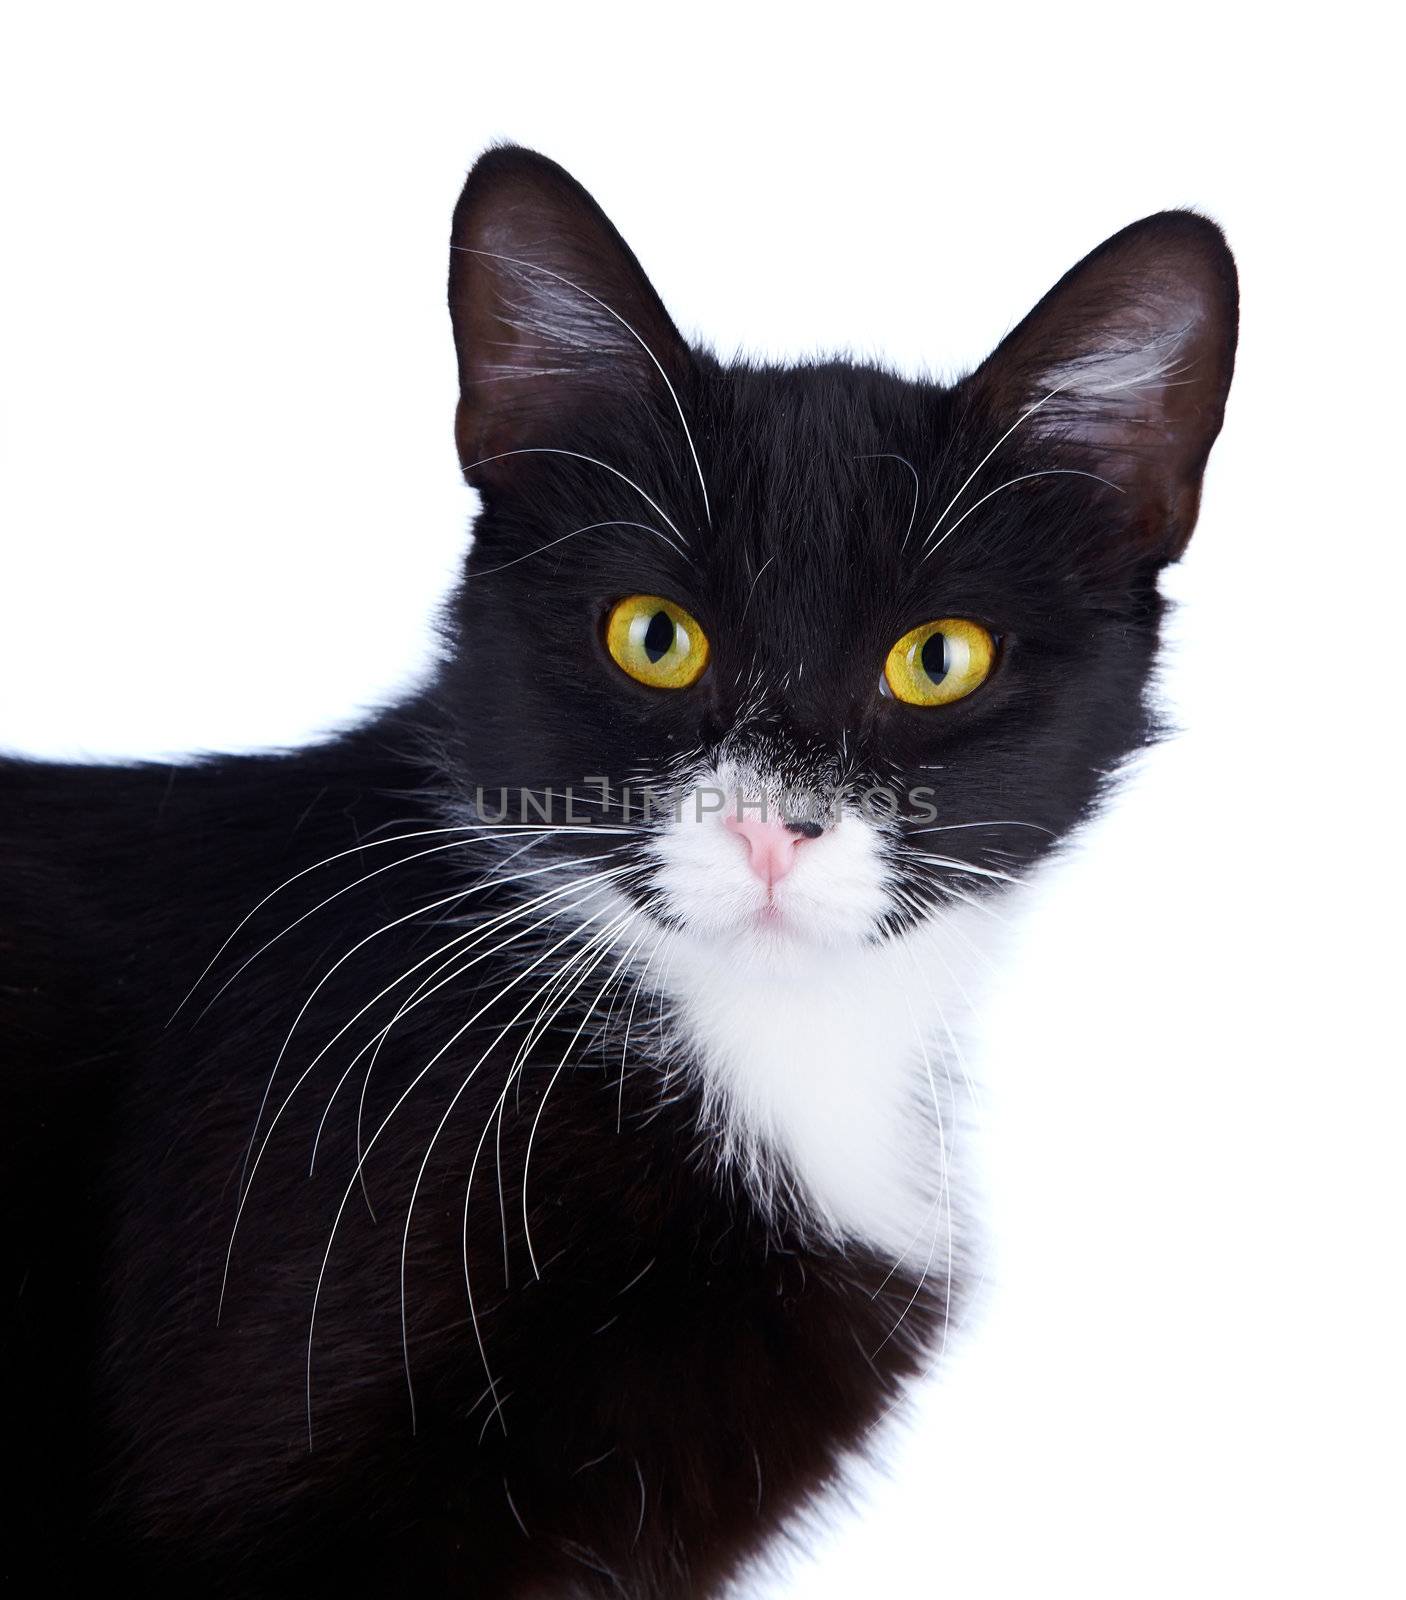 Portrait of a cat. Black-and-white cat. Cat with yellow eyes. Cat on a white background. Black cat. House predator. Small predatory animal.